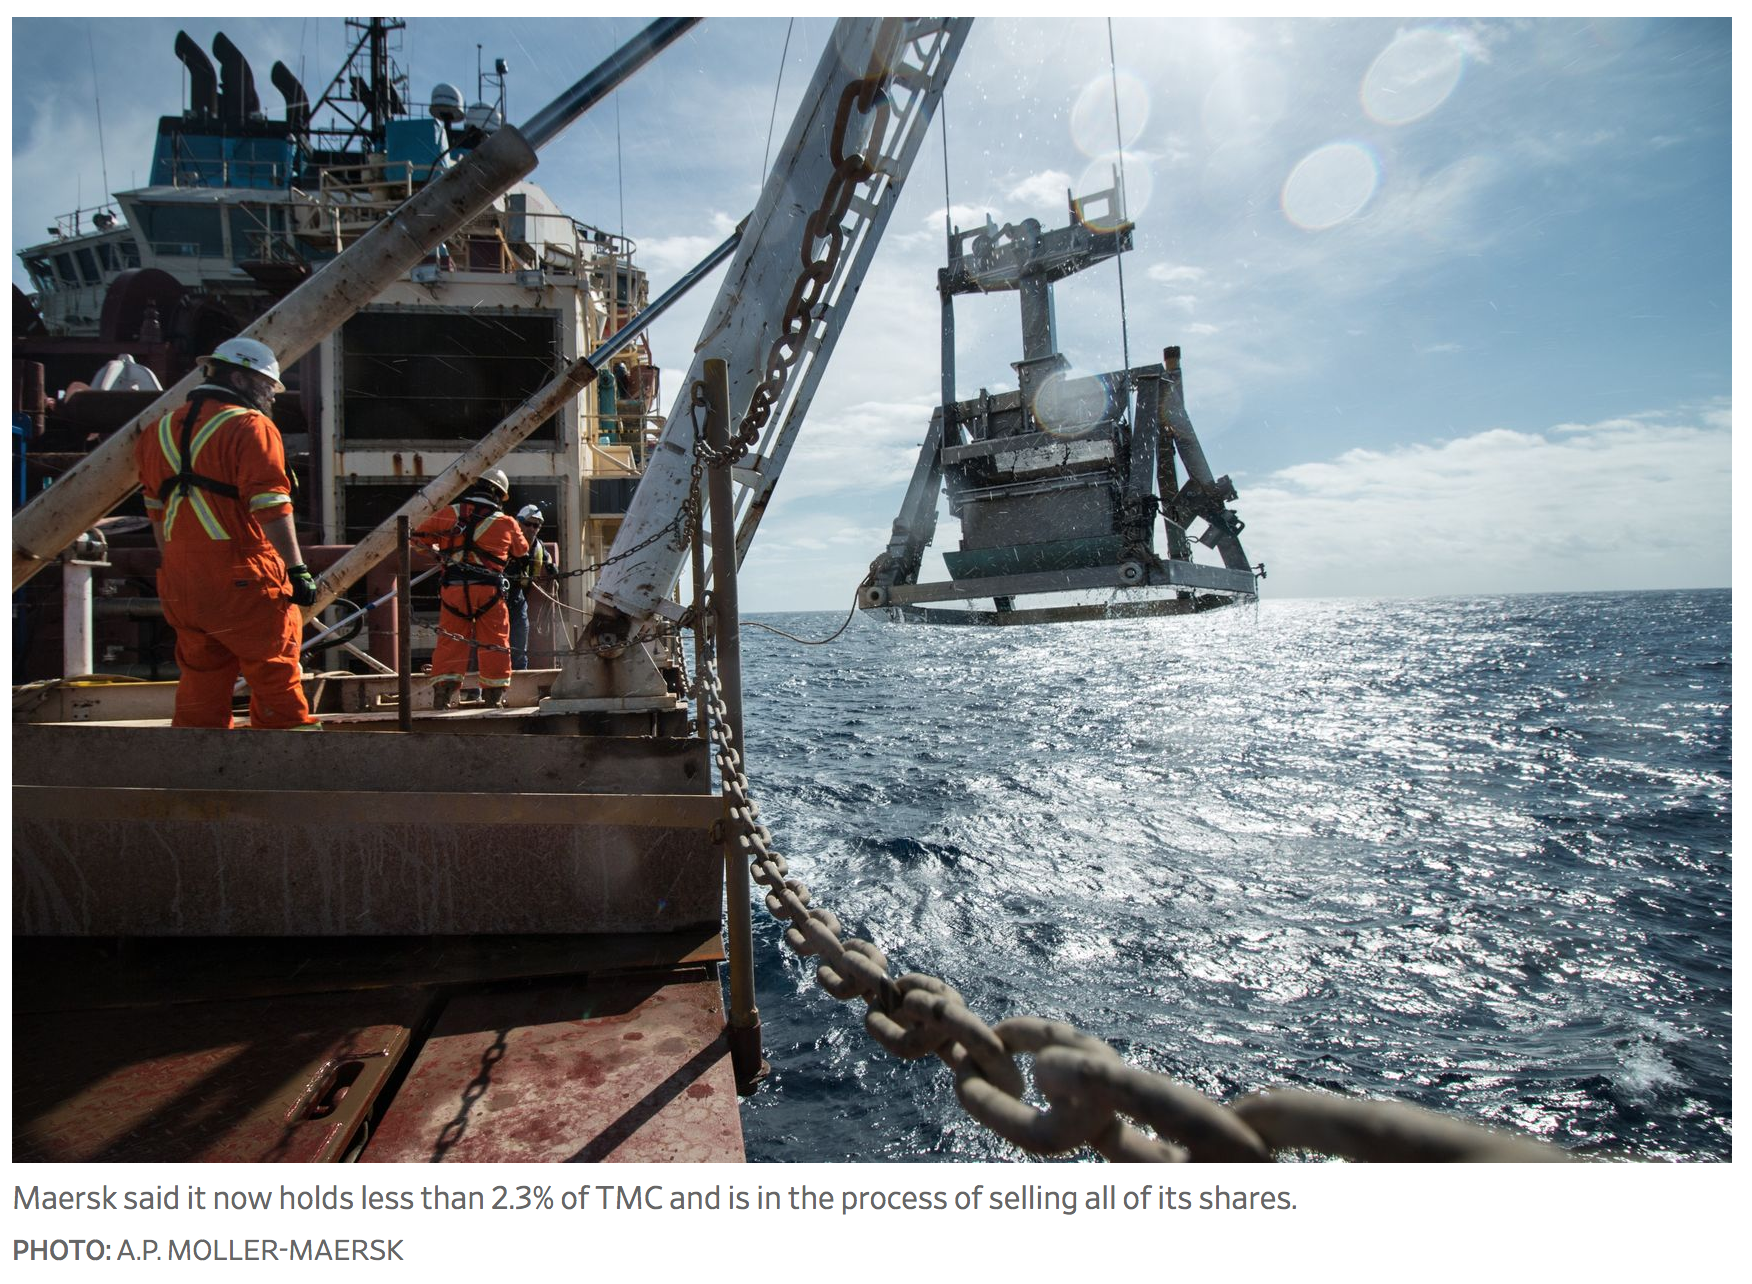 Governments Turn Against Deep-Sea Mining In The Face Of Increase In Demand For Metals